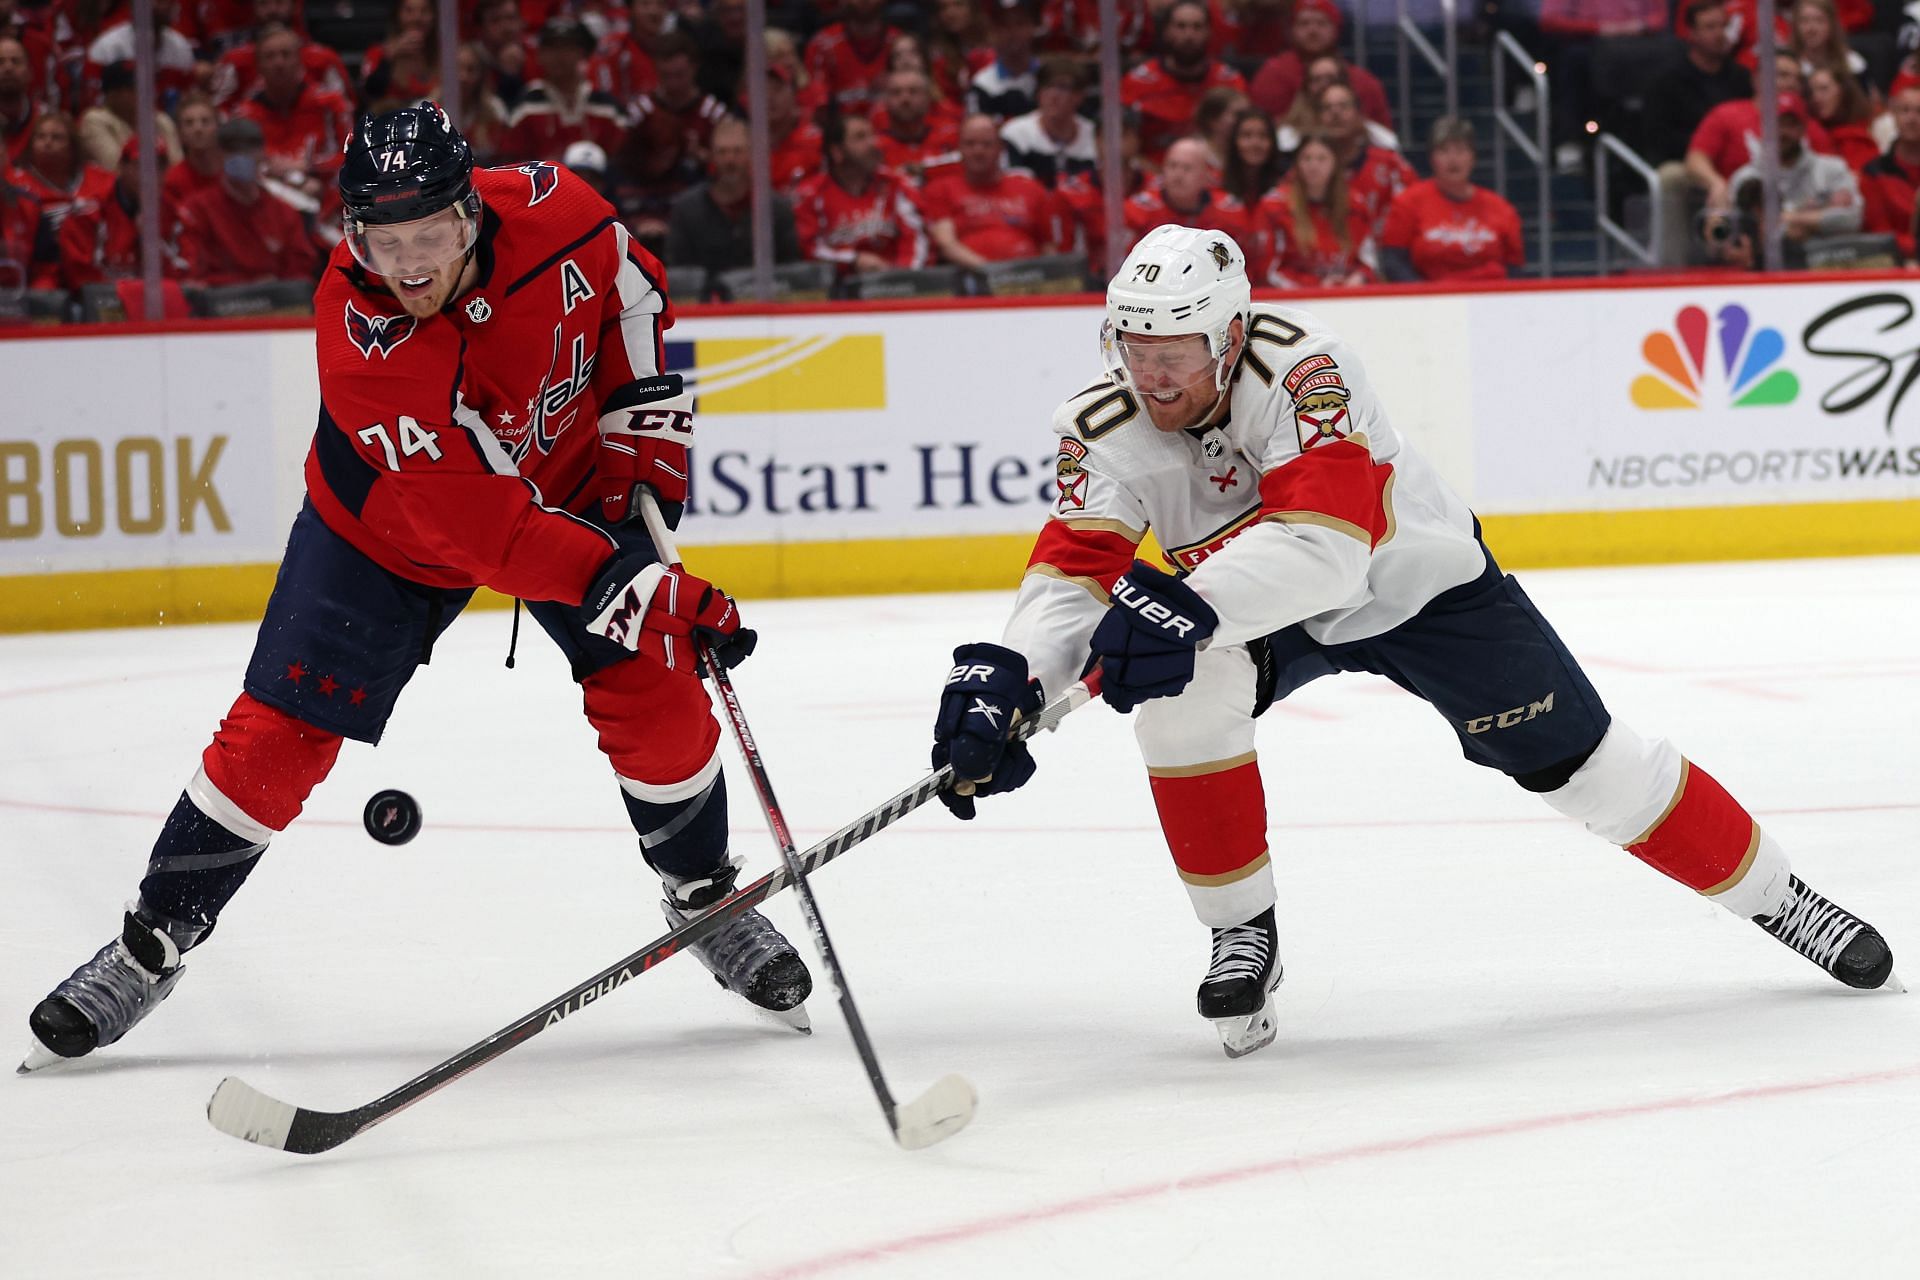 Florida Panthers injury report feat. Spencer Knight, Givani Smith, and more